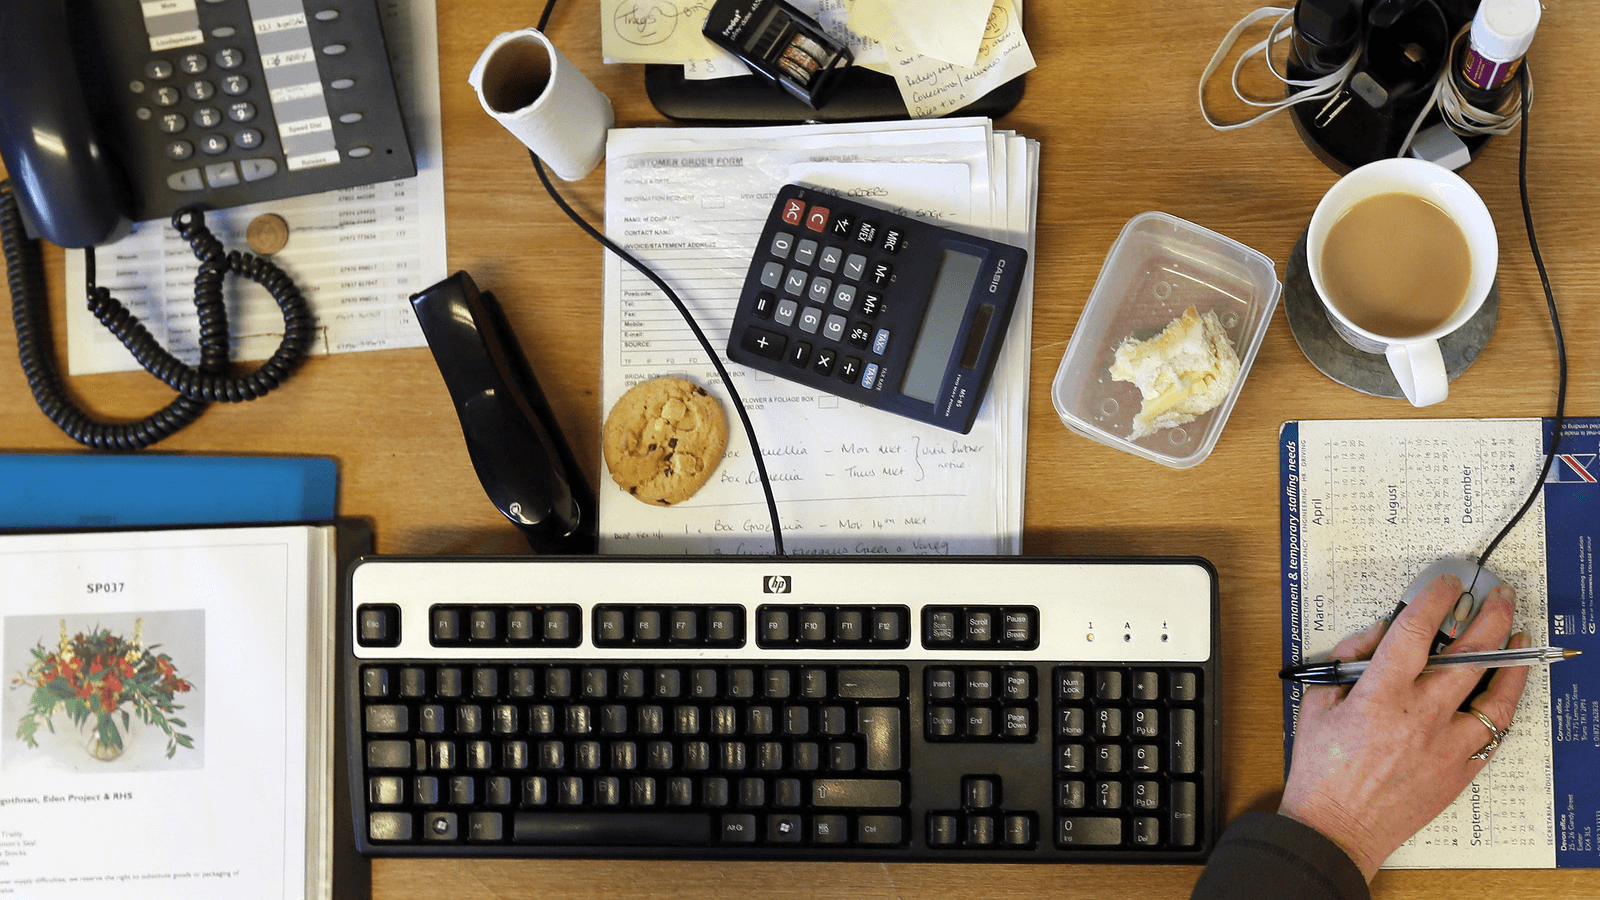 A desk full of food, keyboard, coffee and other stuff.